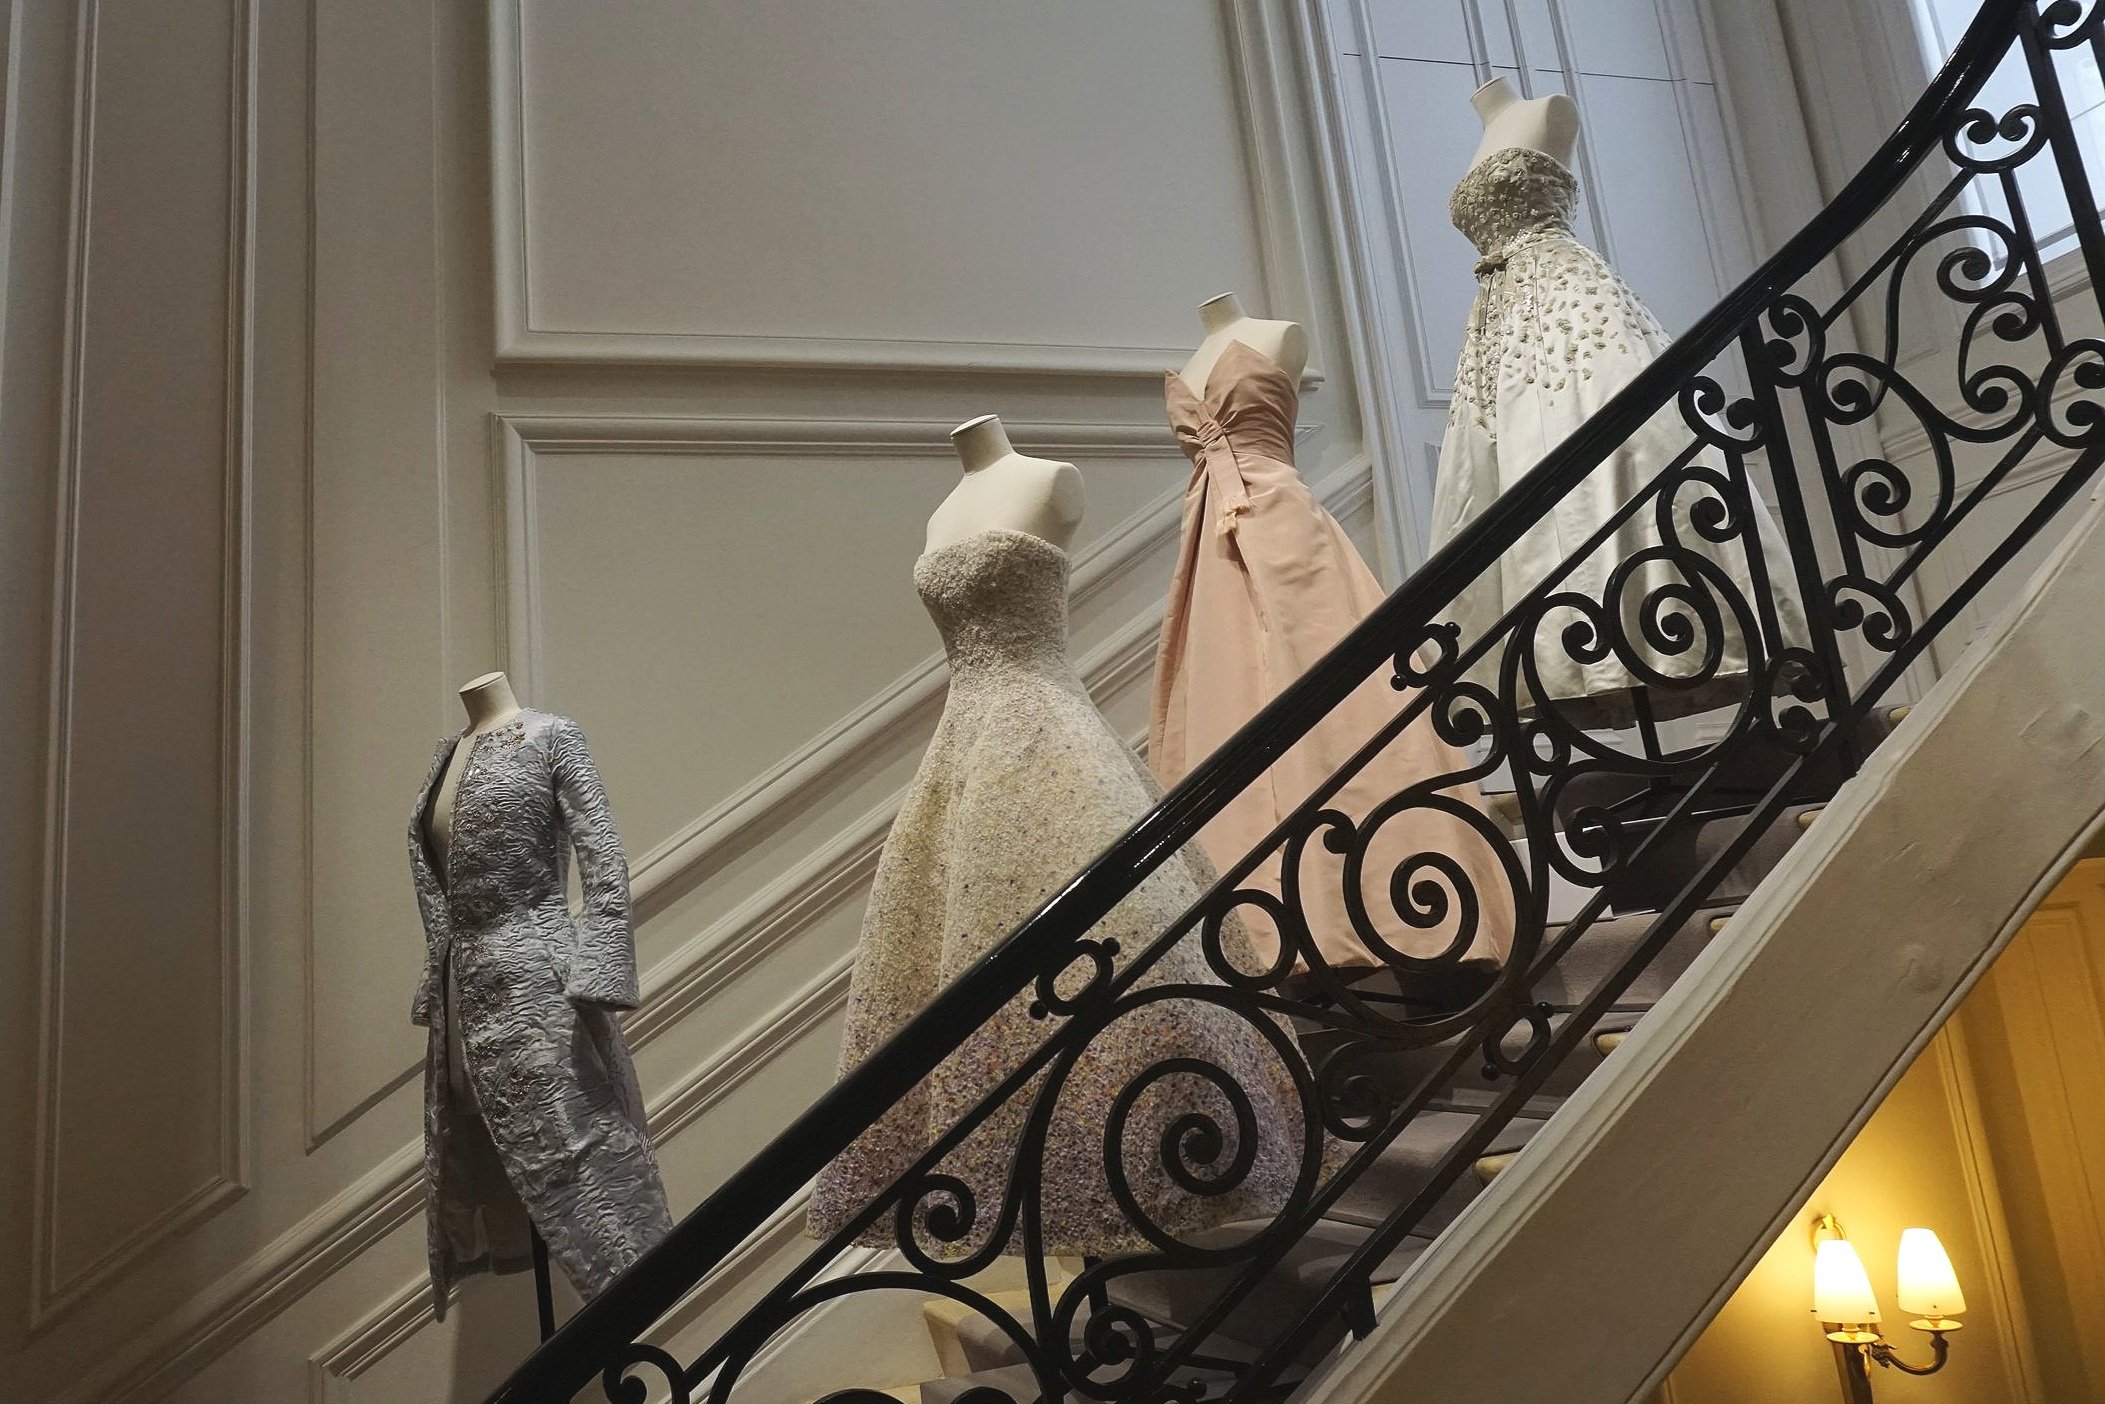 The staircase at Dior Avenue Montaigne with dresses by Raf Simons